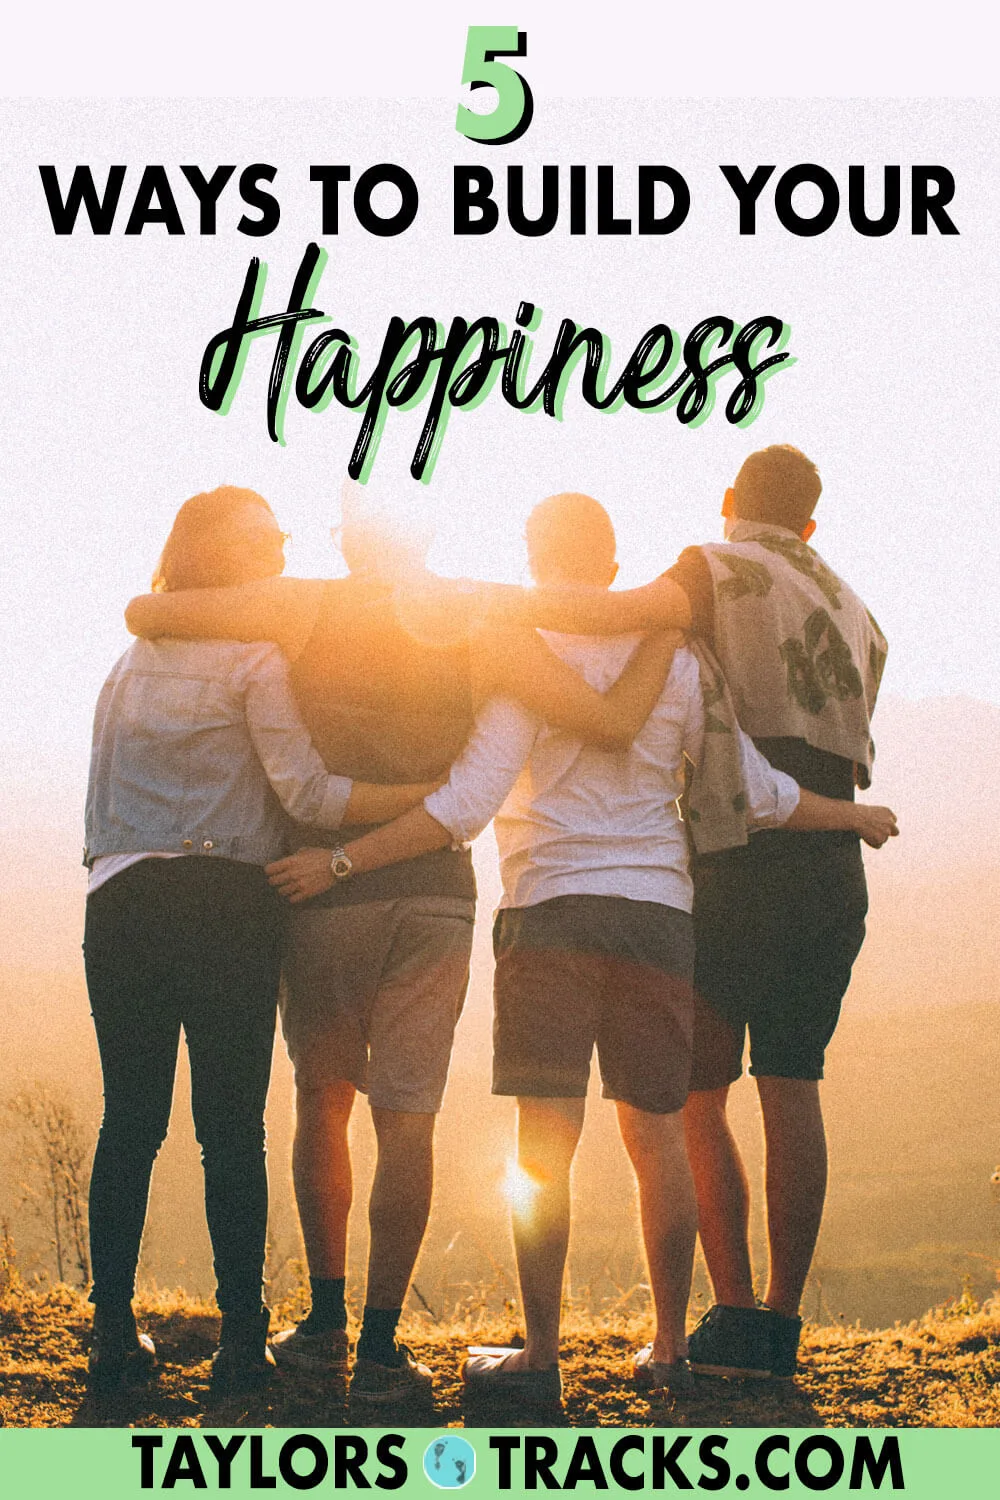 Learn how to build your happiness with these happiness tips that will teach you the 5 essential pillars of being happy. Happiness is easy, click to find out just how simple it is.